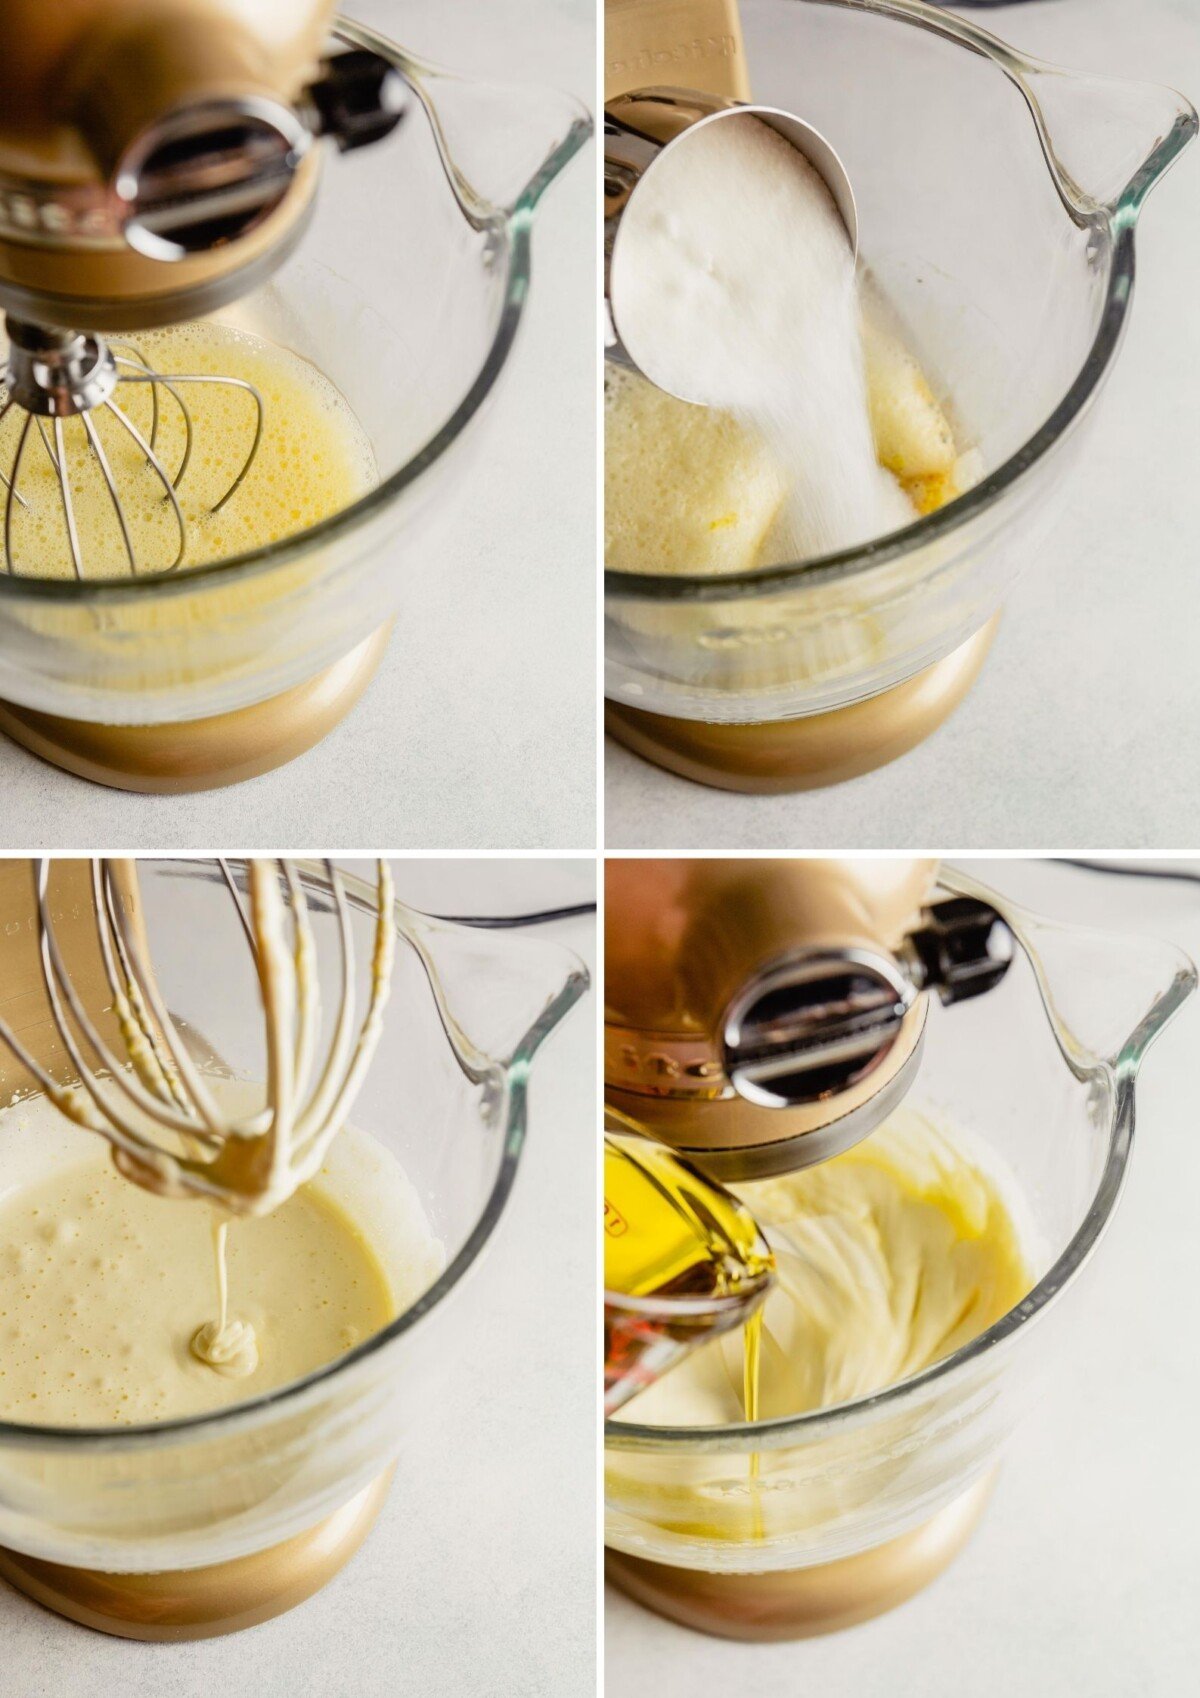 grid of images showing the process of making cake—whipping eggs, adding sugar, adding oil